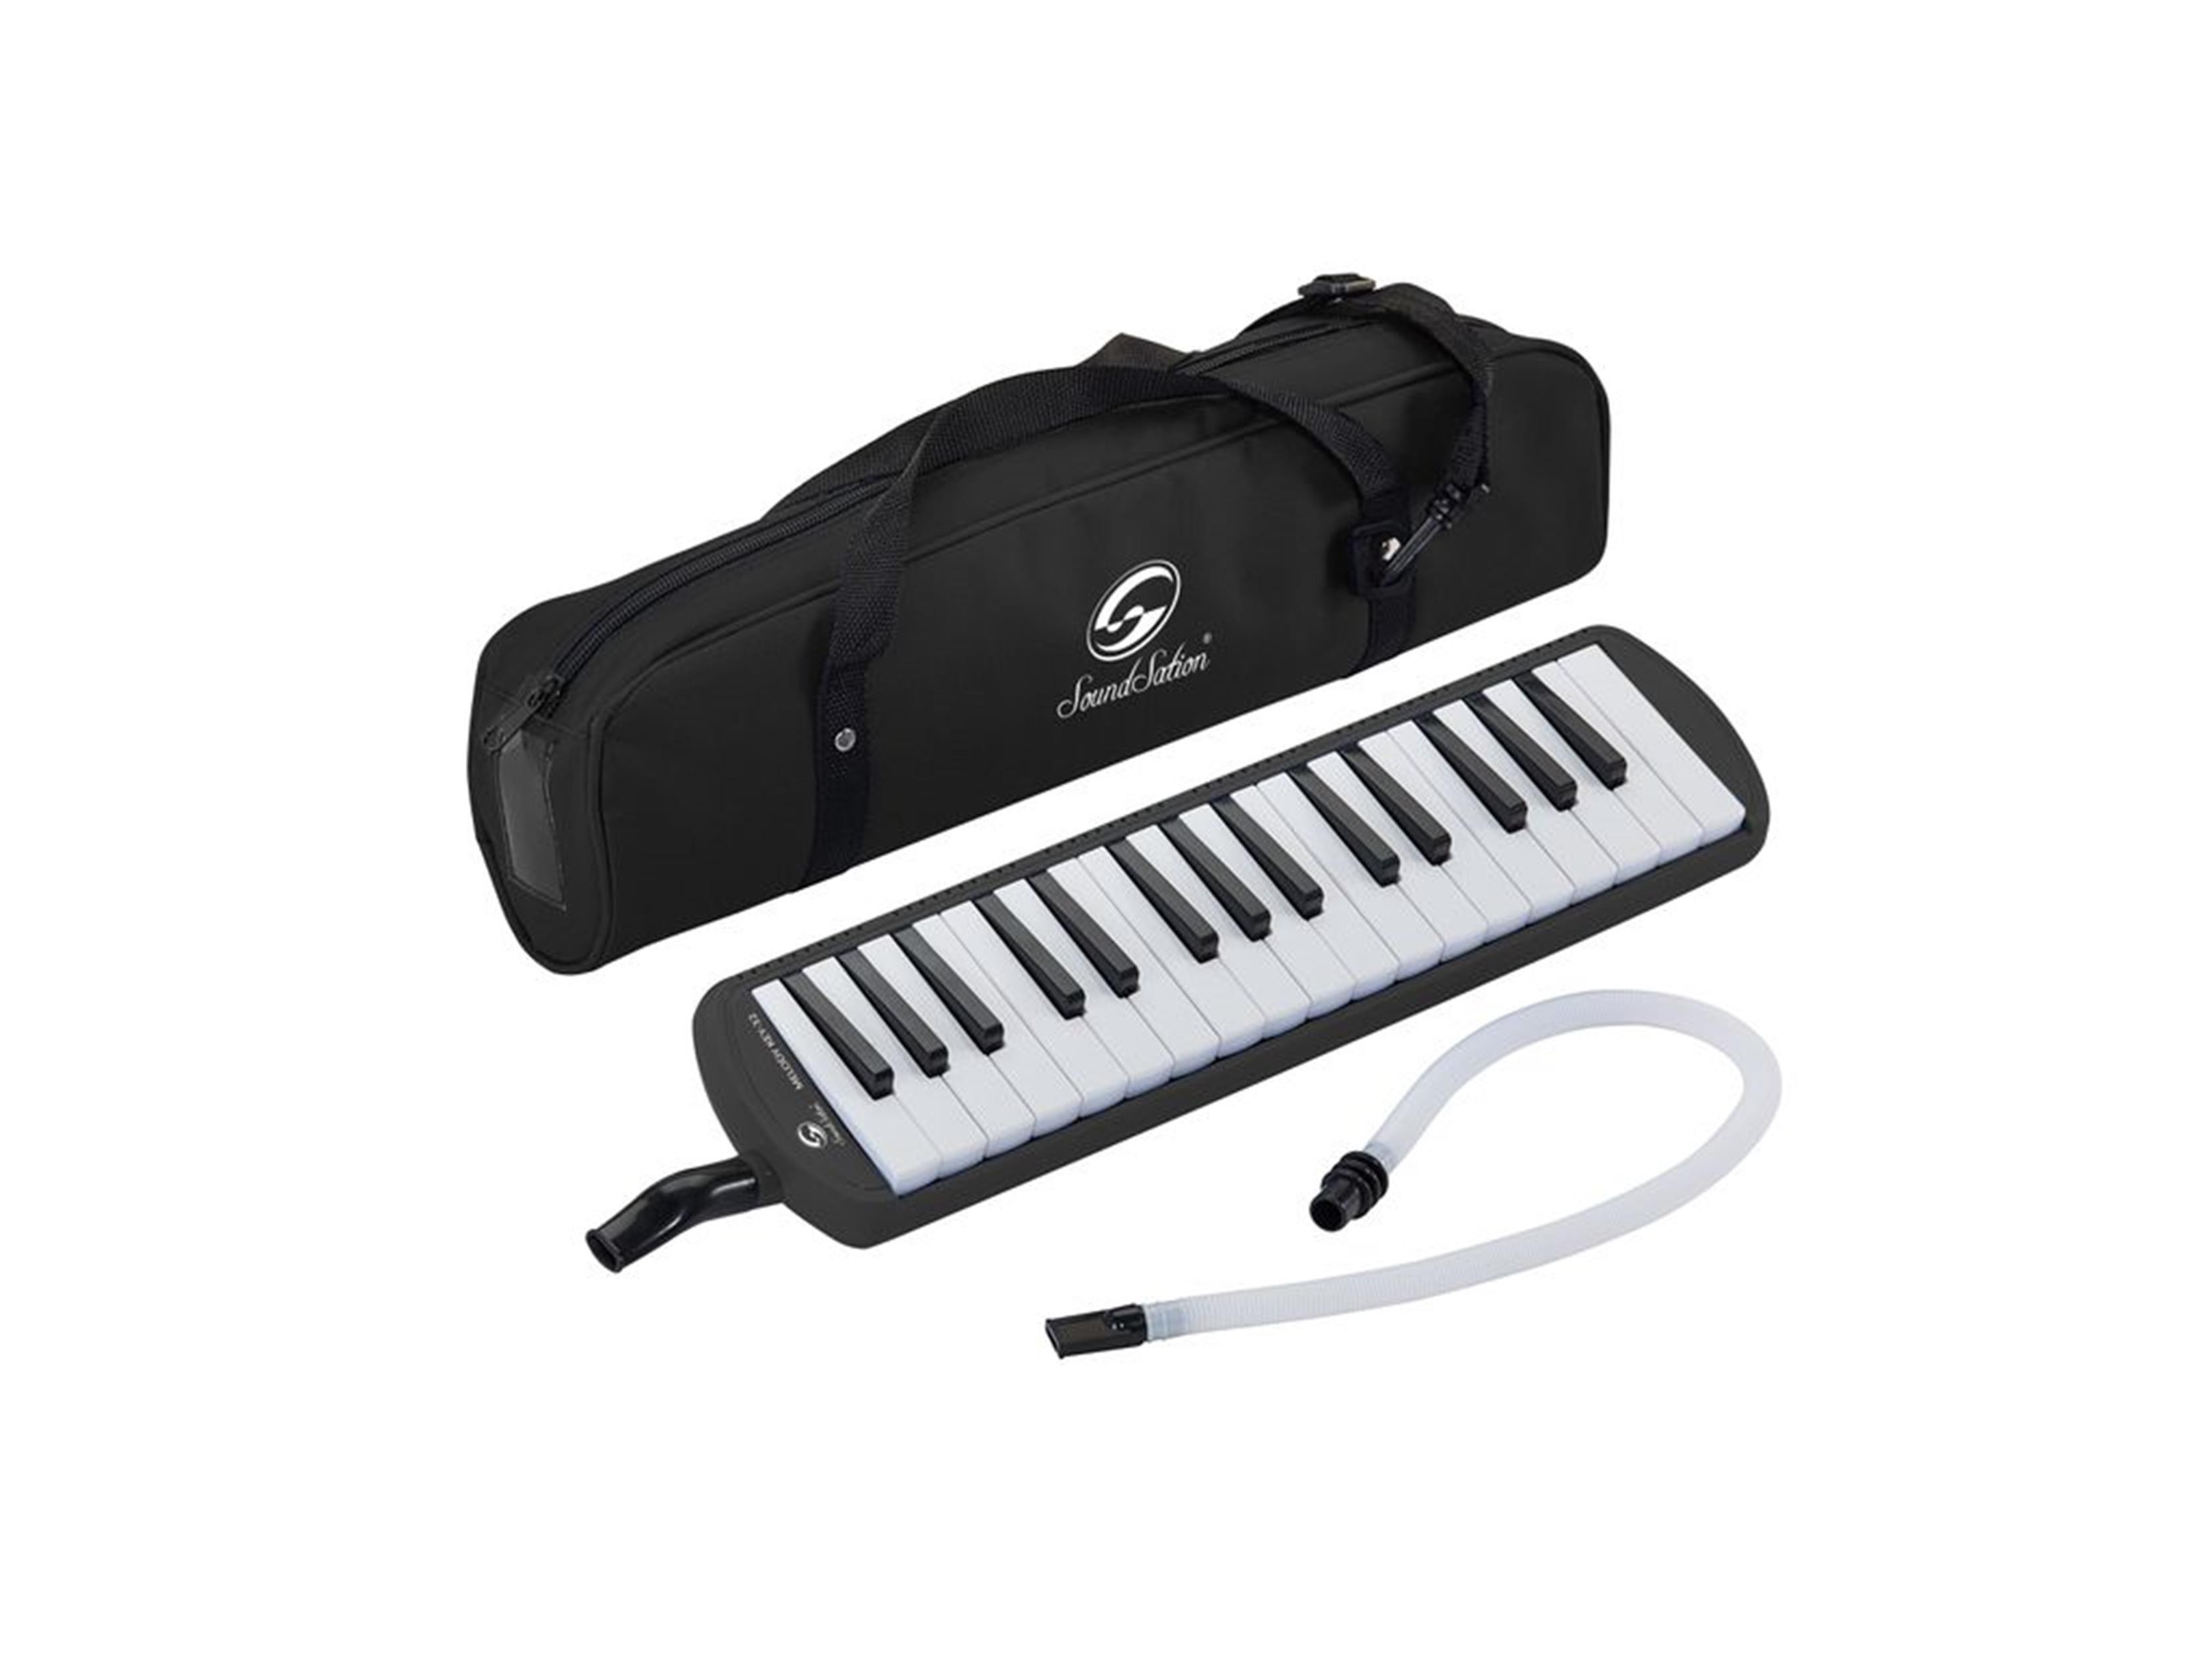 SOUNDSATION MELODICA MELODY KEY 32 - Tastiere Tastiere ed Expander